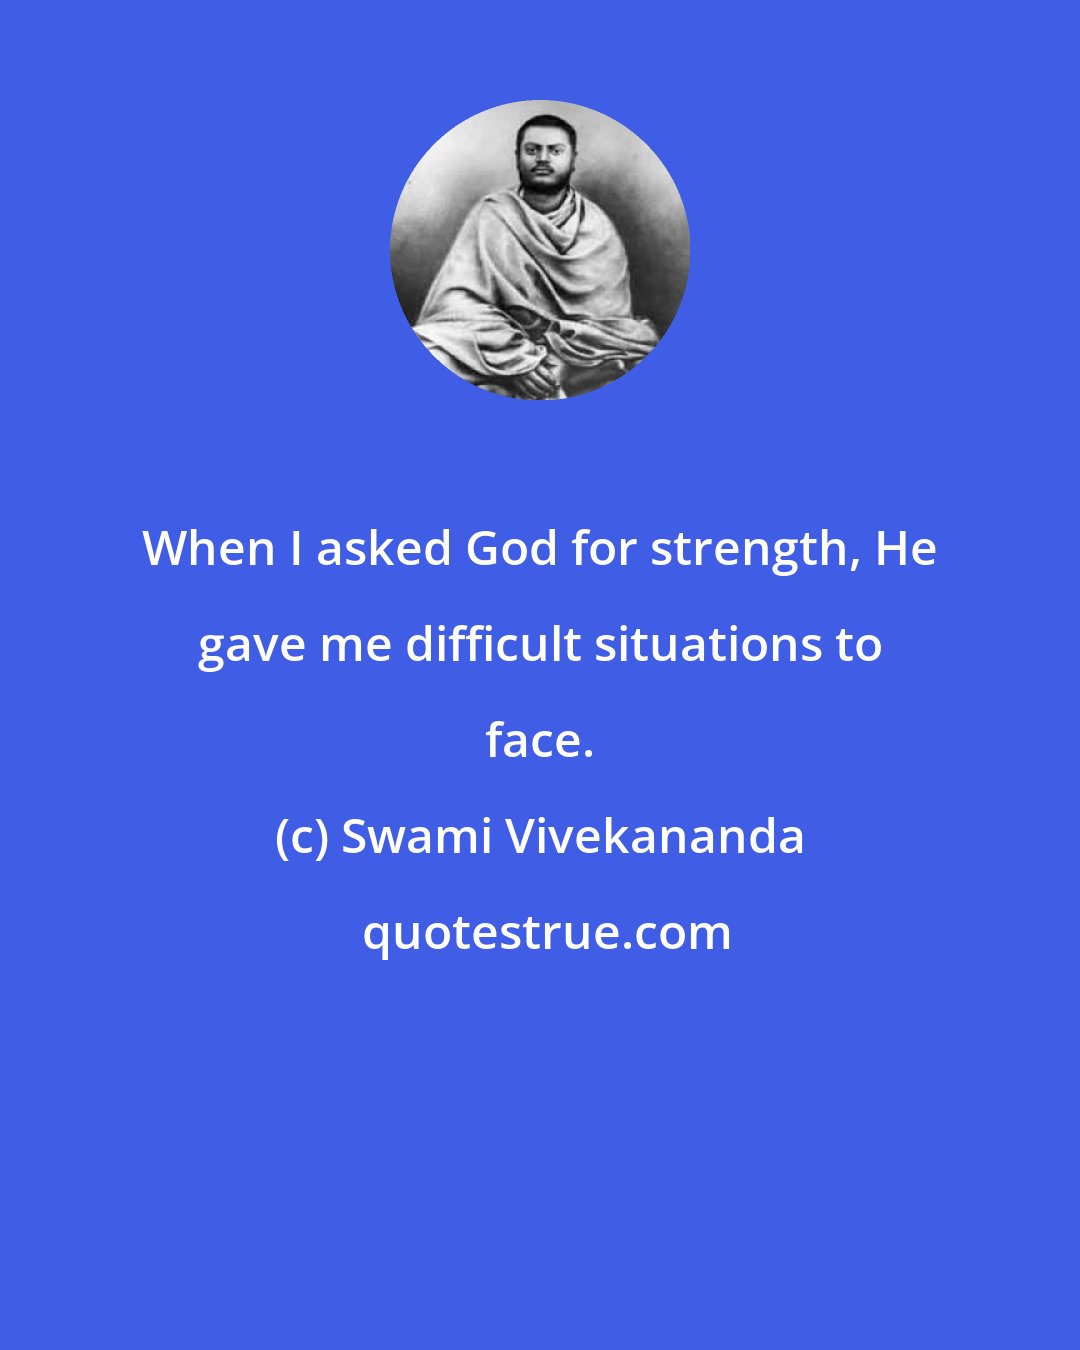 Swami Vivekananda: When I asked God for strength, He gave me difficult situations to face.